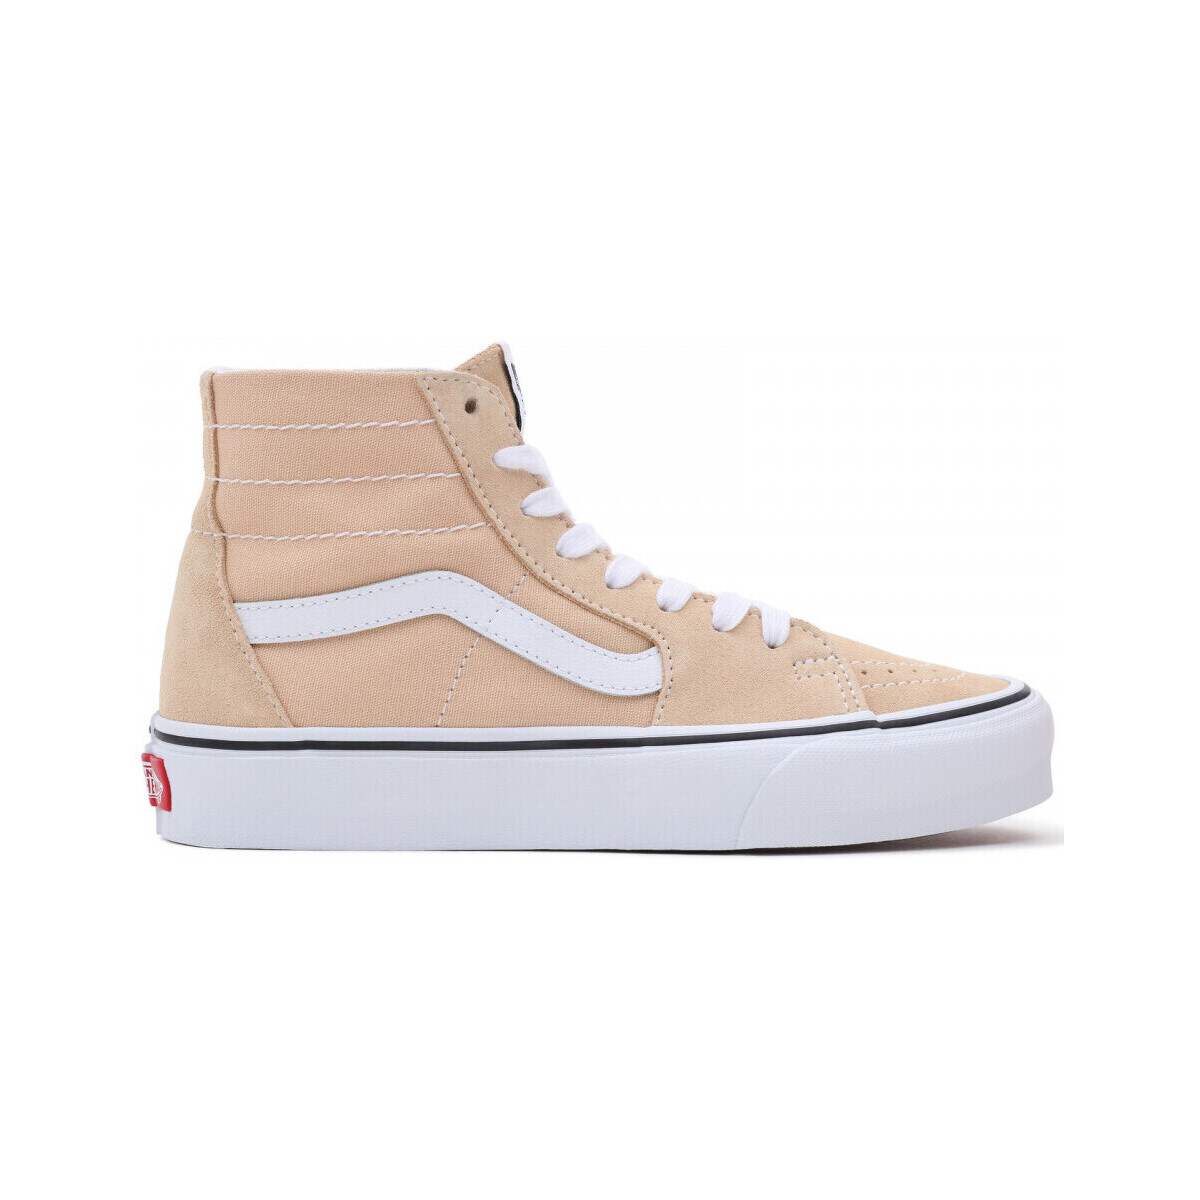 Chaussures Homme Chaussures de Skate Vans Ditsy Sk8-hi tapered color theory Jaune